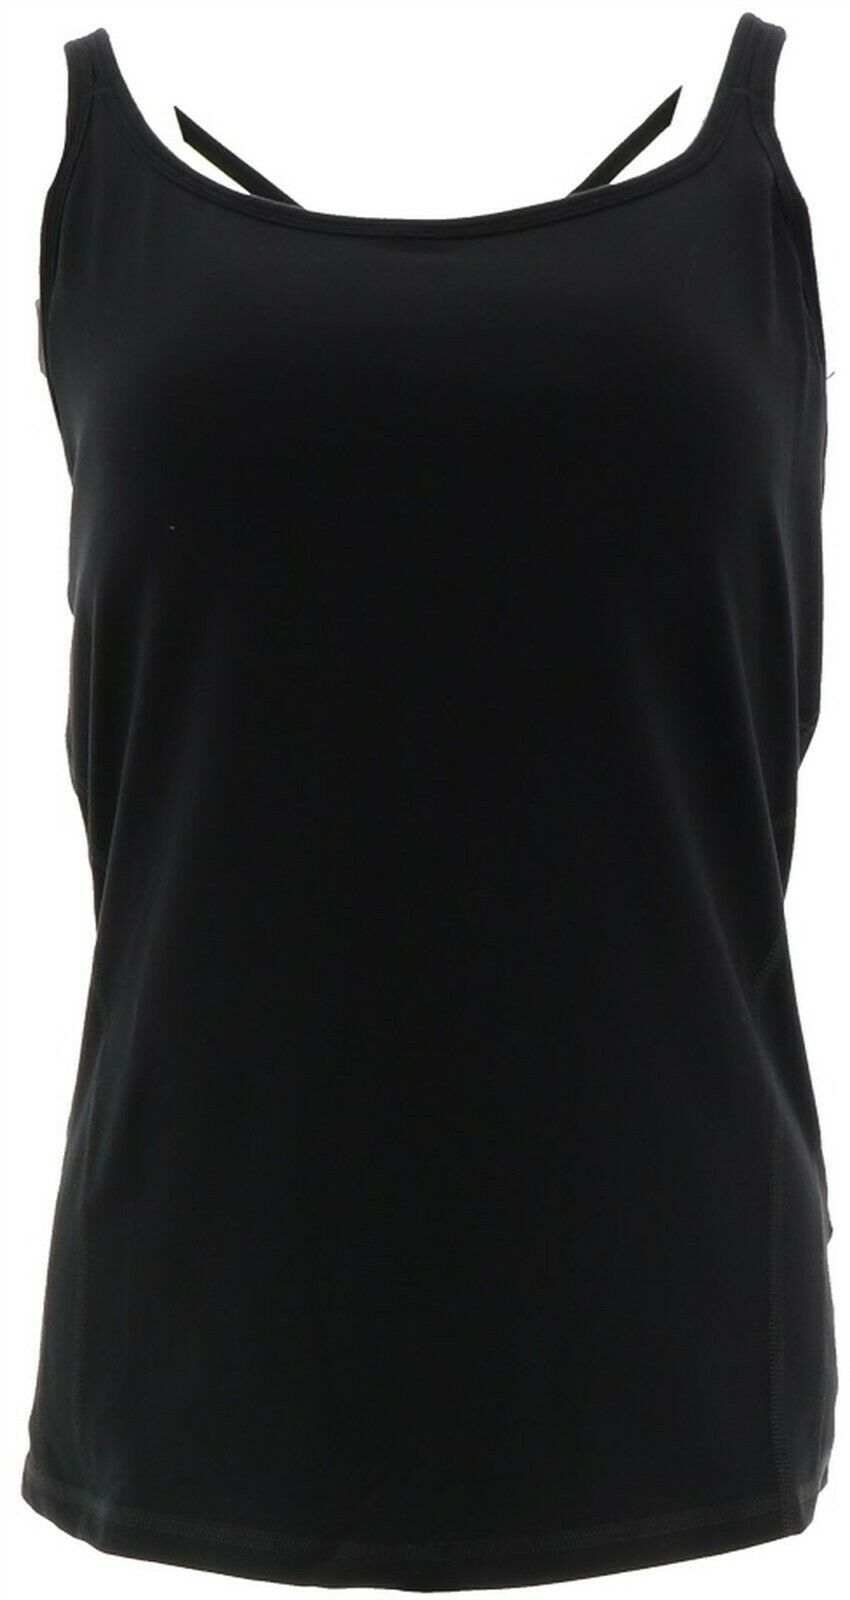 Susan Lucci Collection Cross Back Strap Tank Black XS NEW A308275